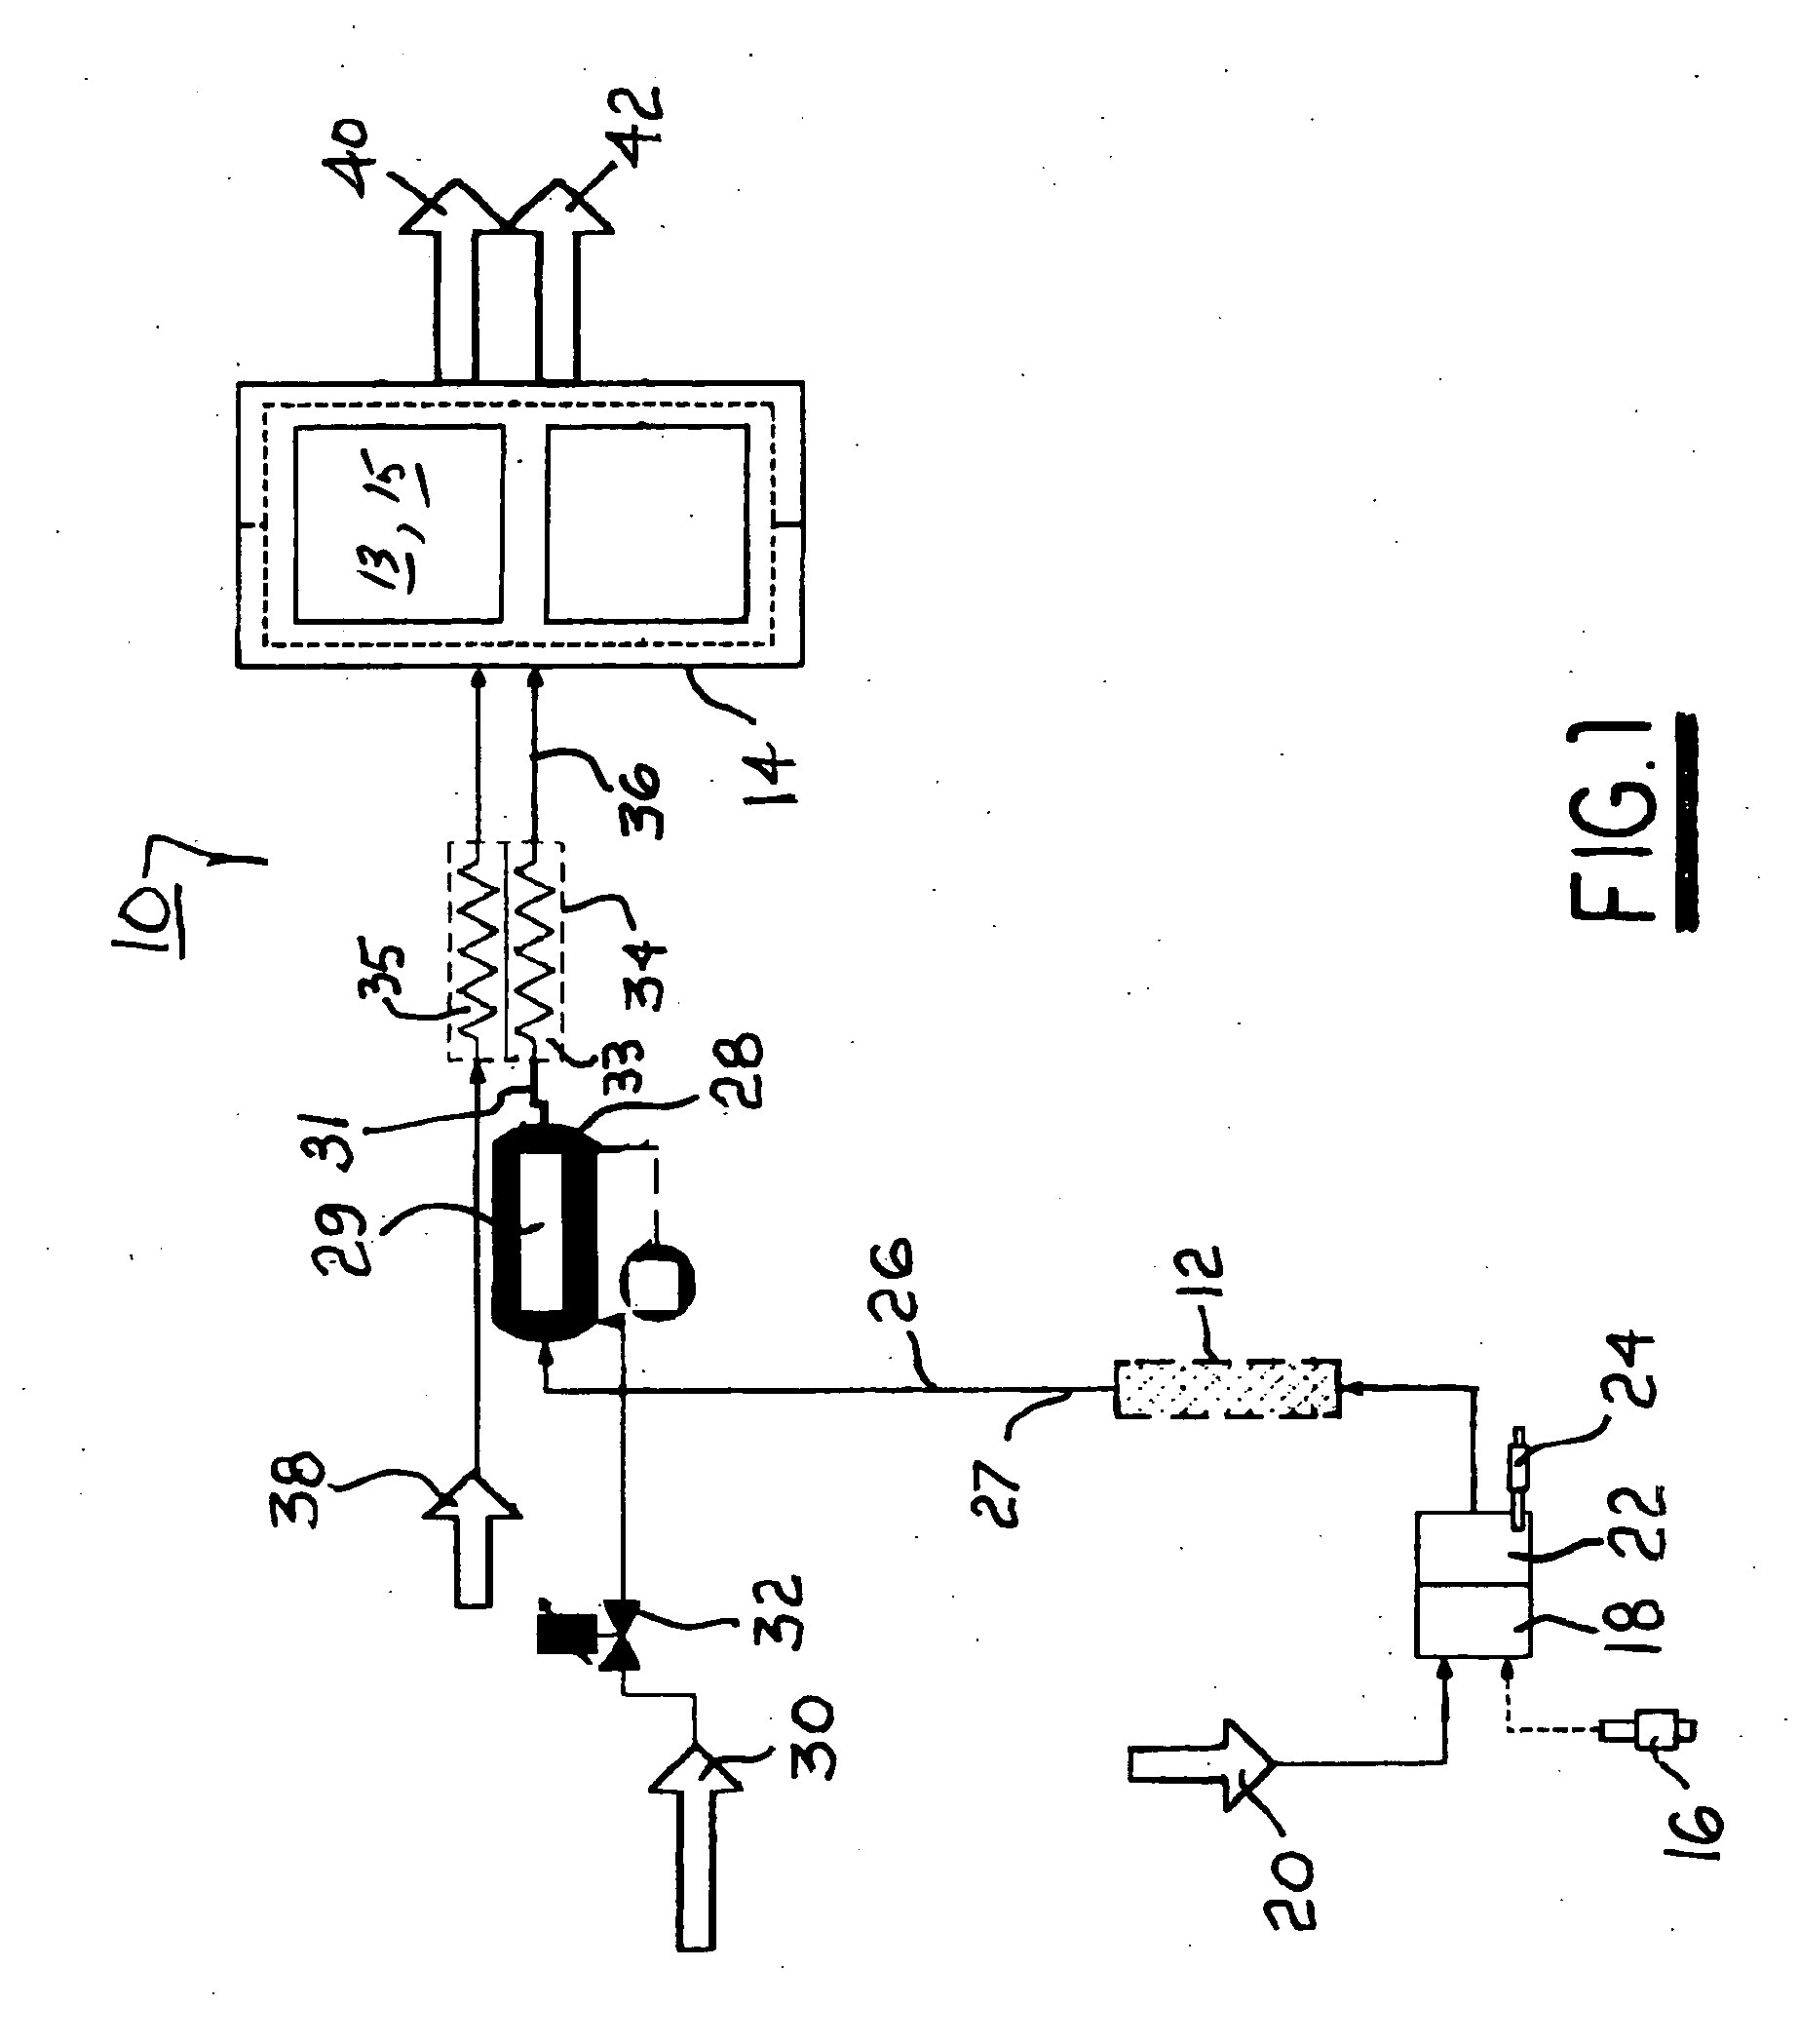 Solid-oxide fuel cell system having an upstream reformate combustor